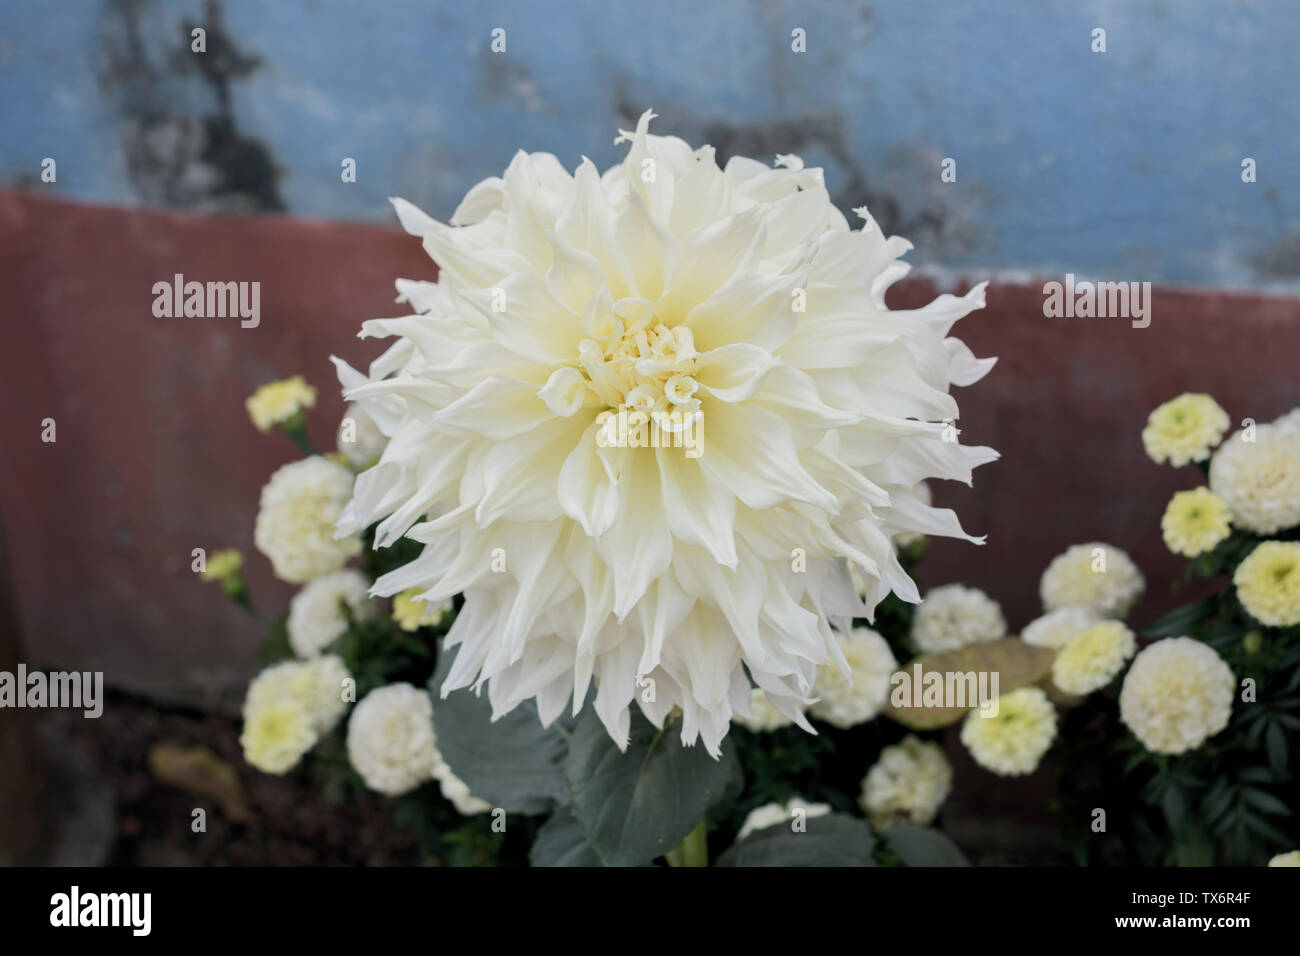 White Guldavari Flower plant, a herbaceous perennial plants. It is a sun loving plant Blooms in early spring to late summer. A very popular flower for Stock Photo